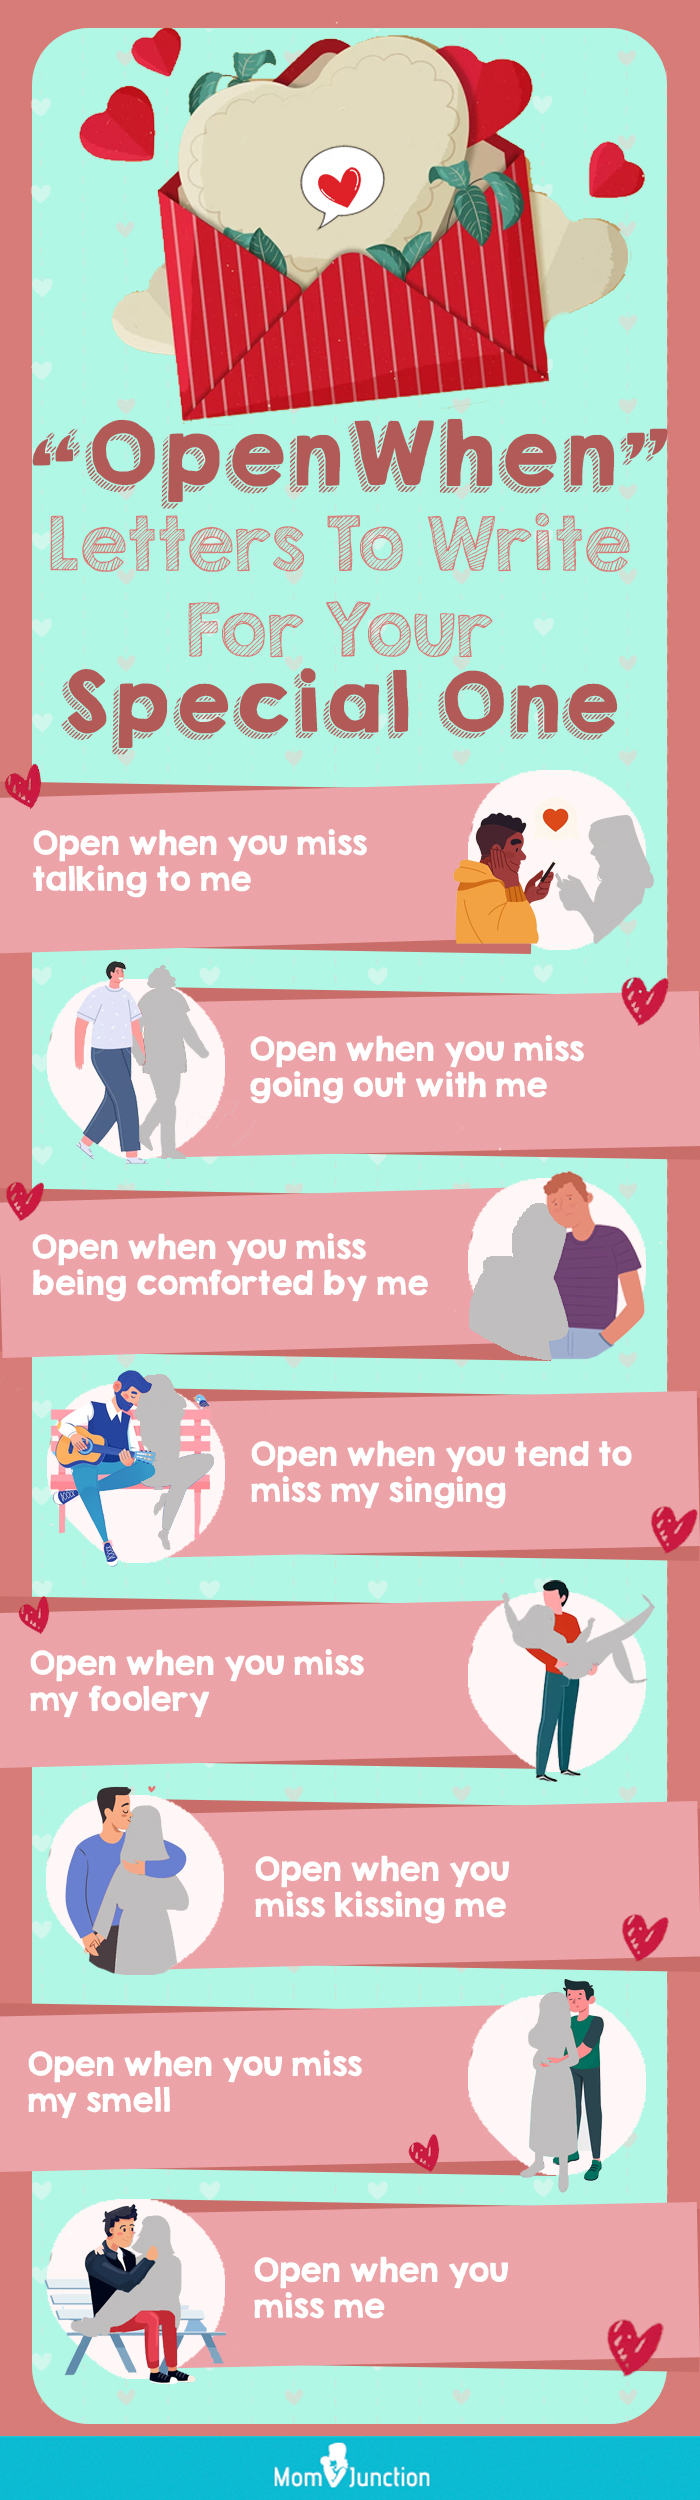 open when letters to write for your special one (infographic)